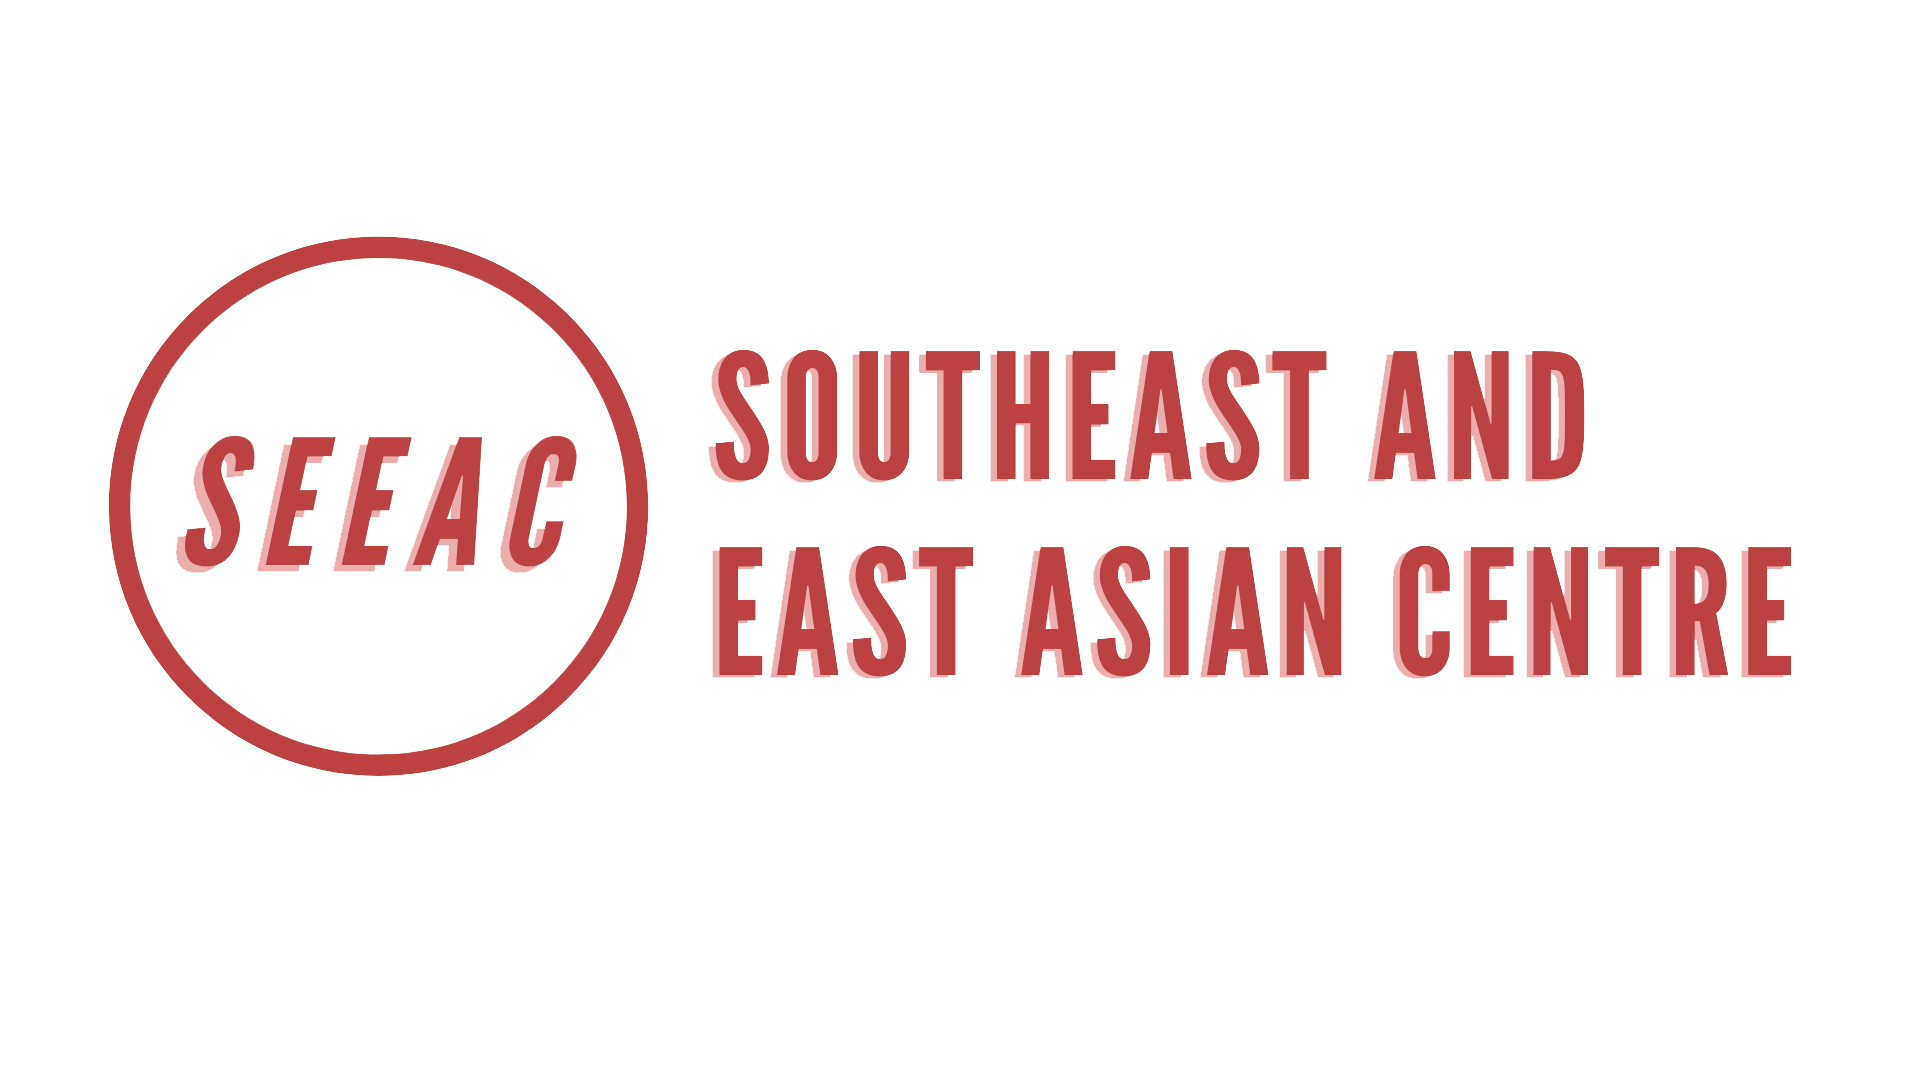 SEEAC southeast and east Asian centre